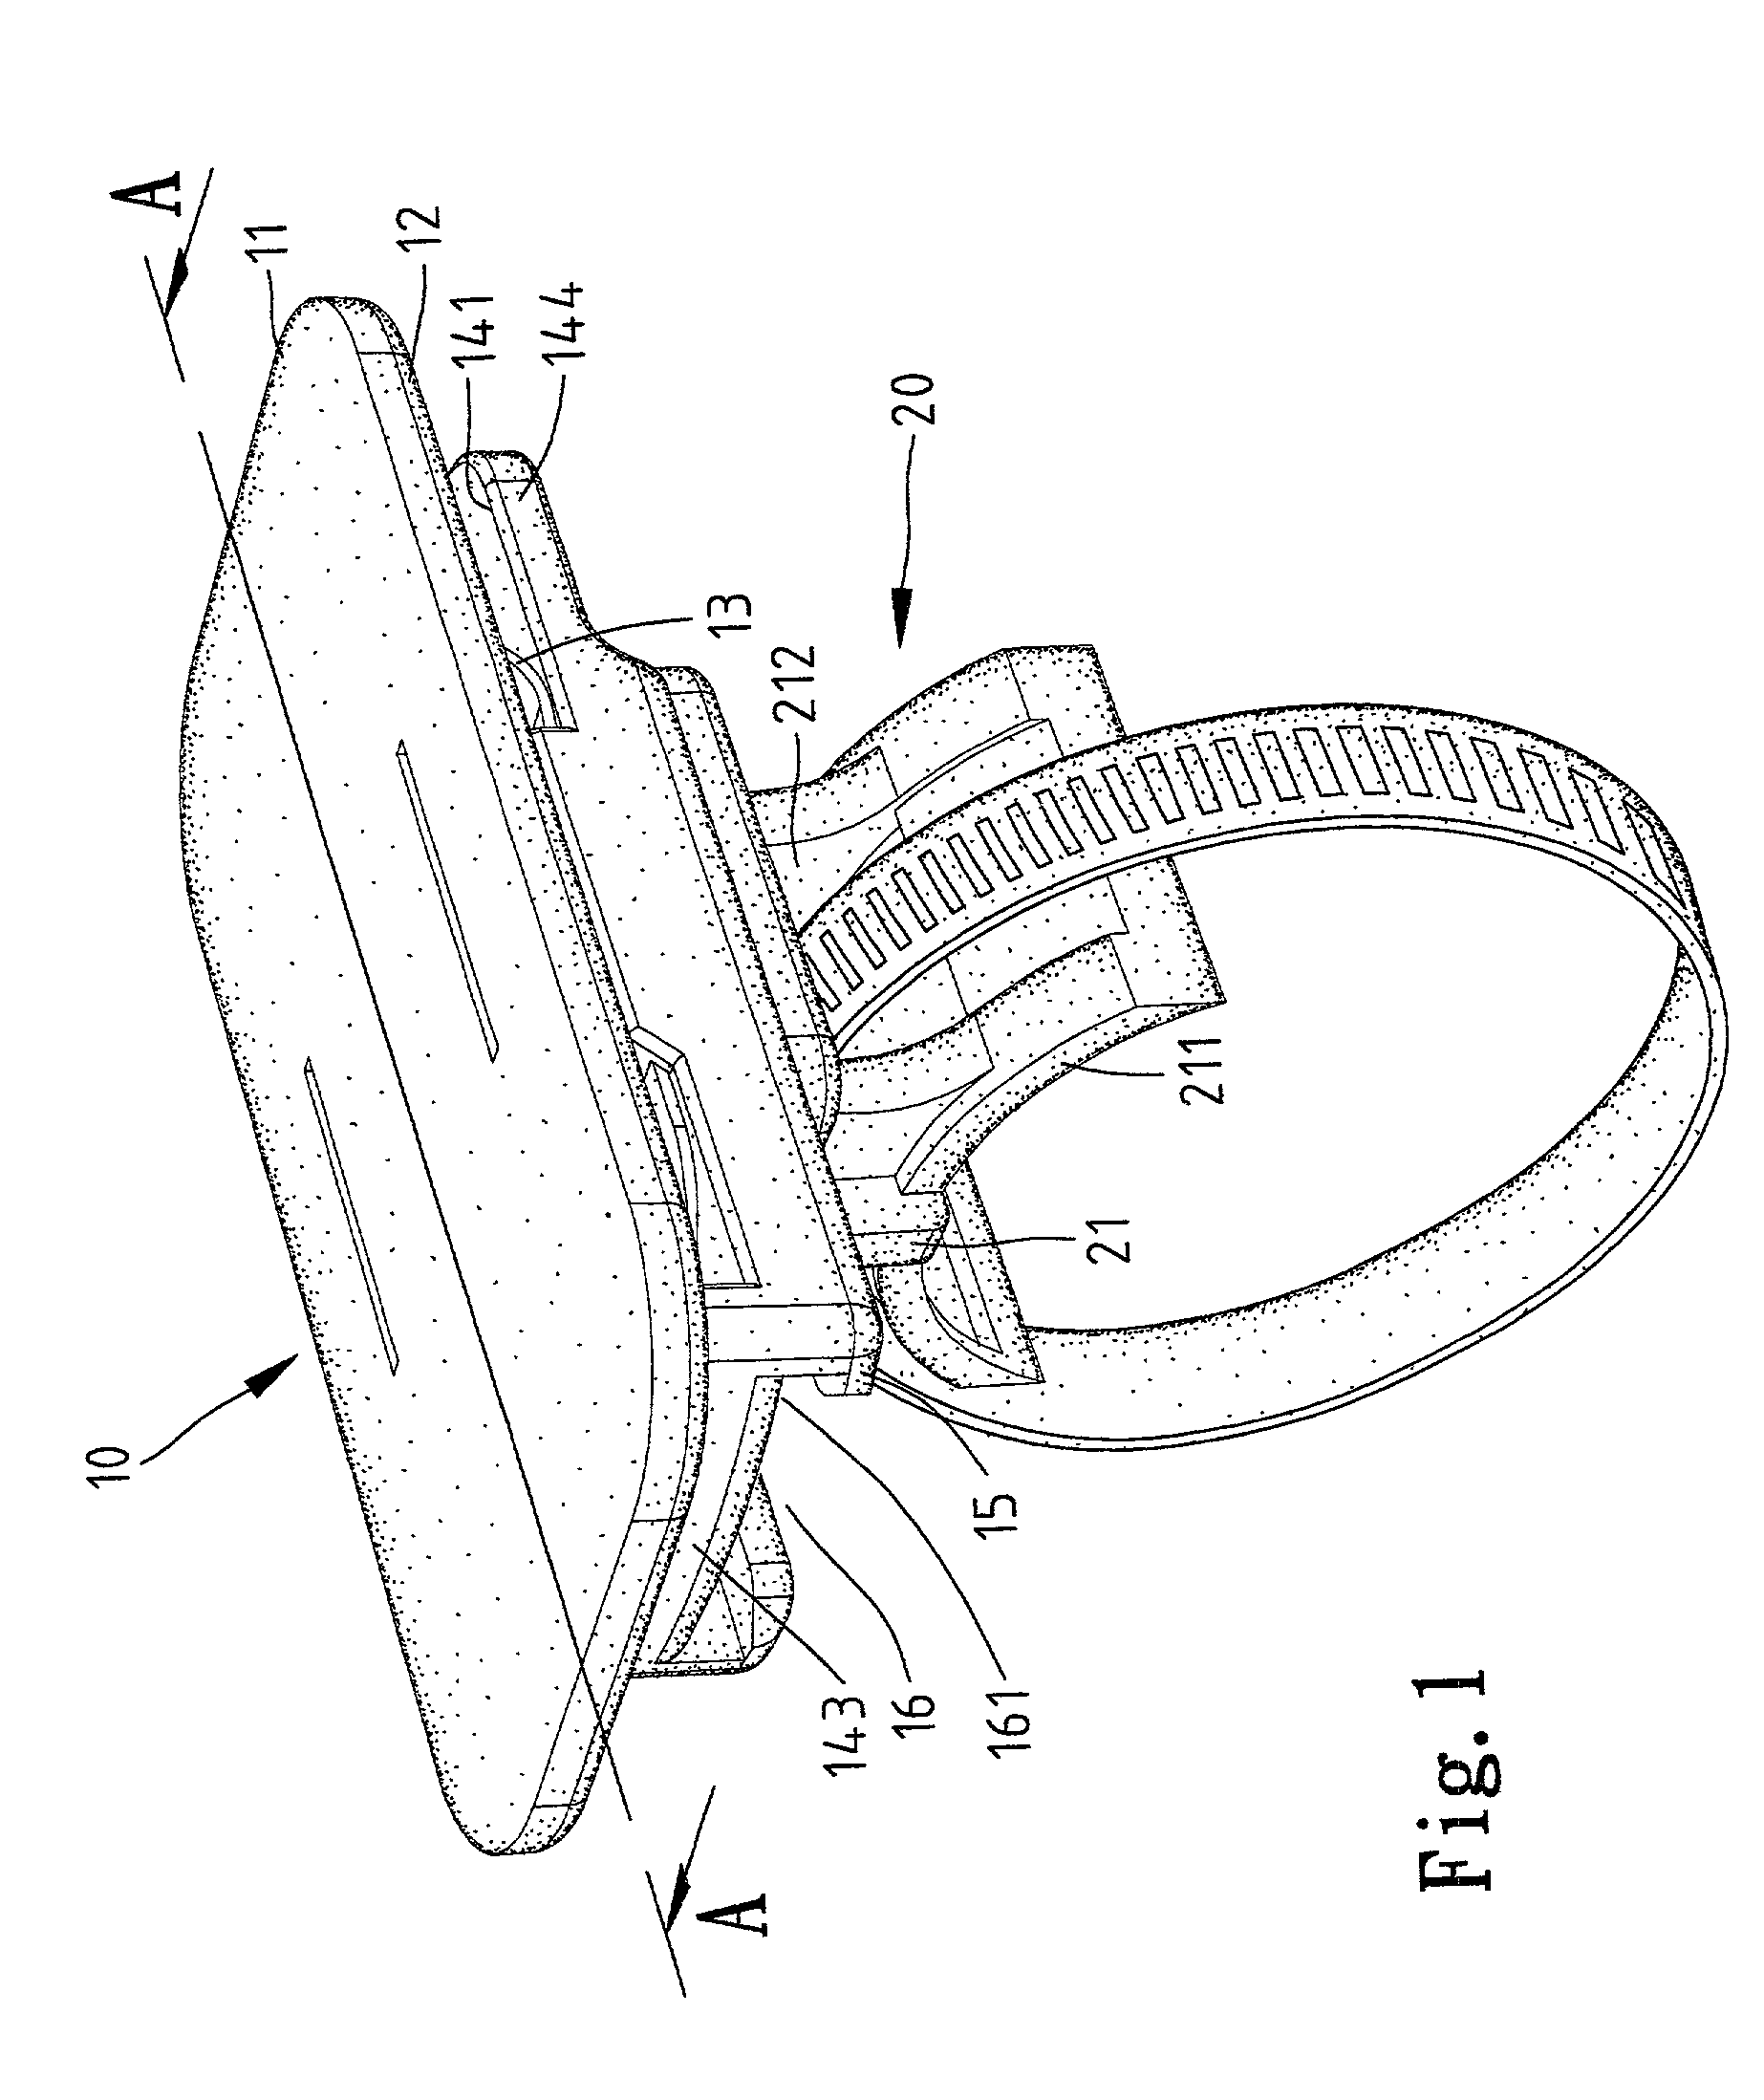 Apparatus for selectively attaching a first object to a second object in a desired orientation